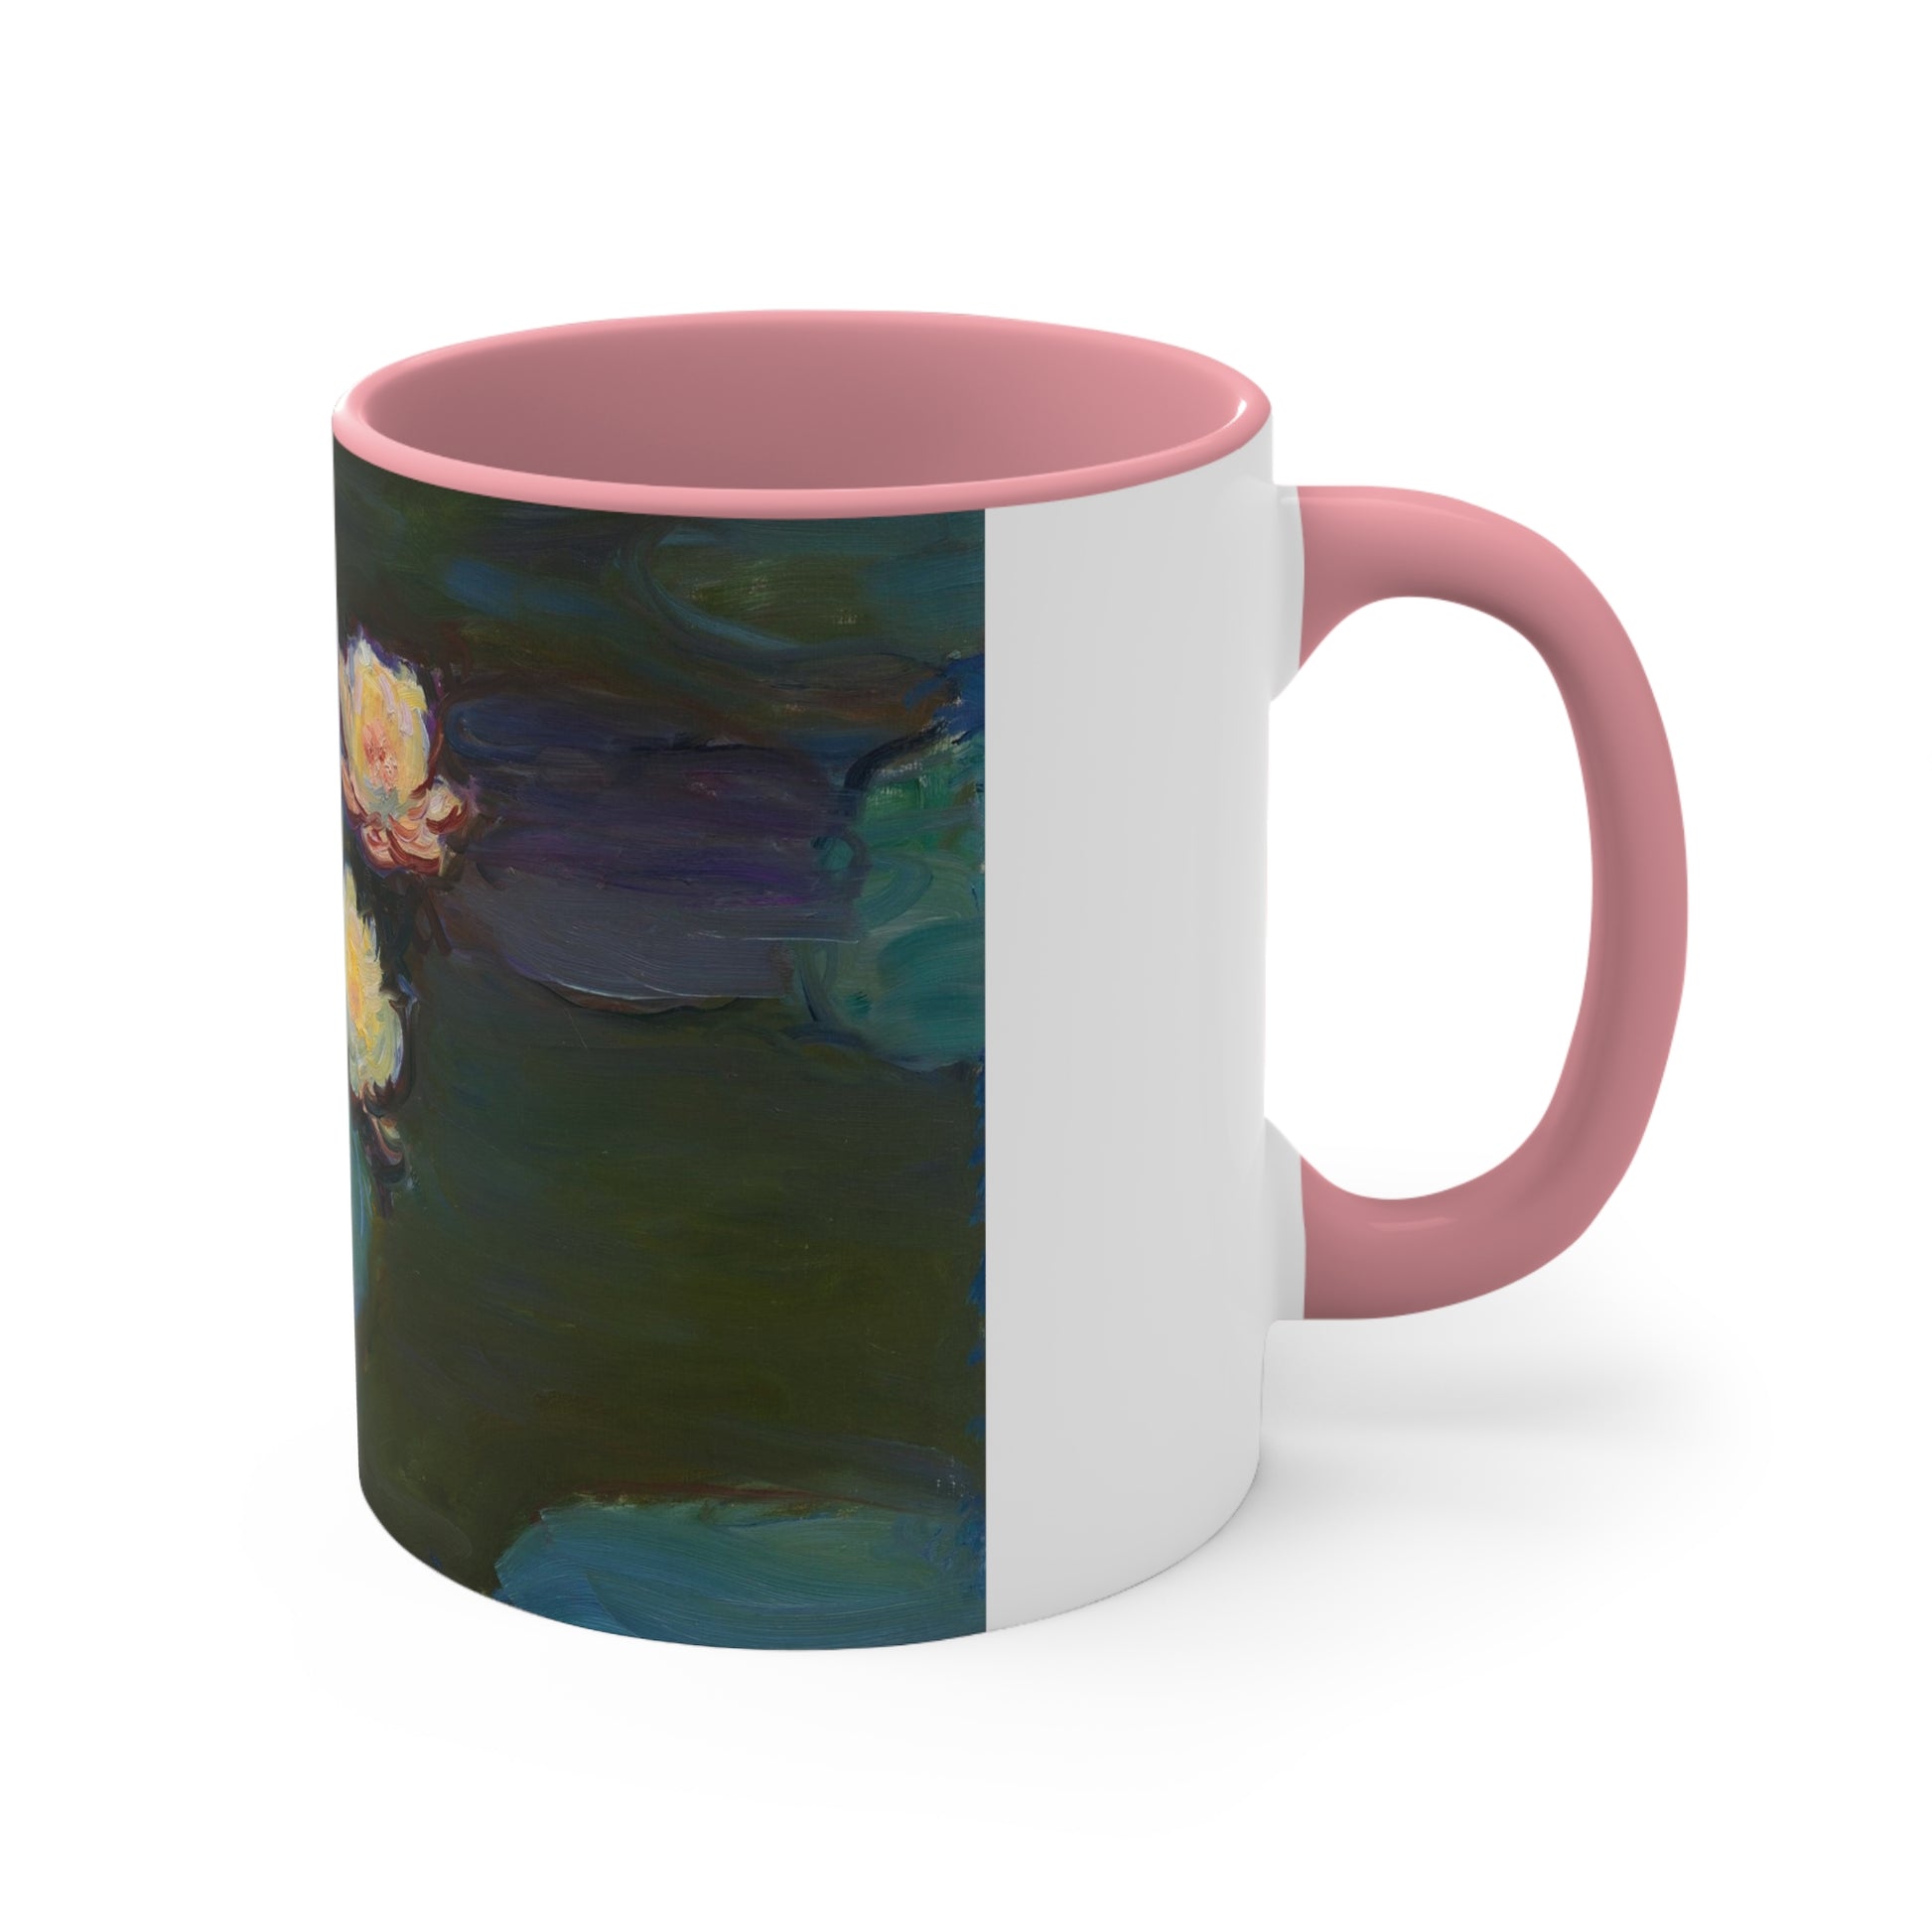 a pink and white coffee mug with a painting of a flower